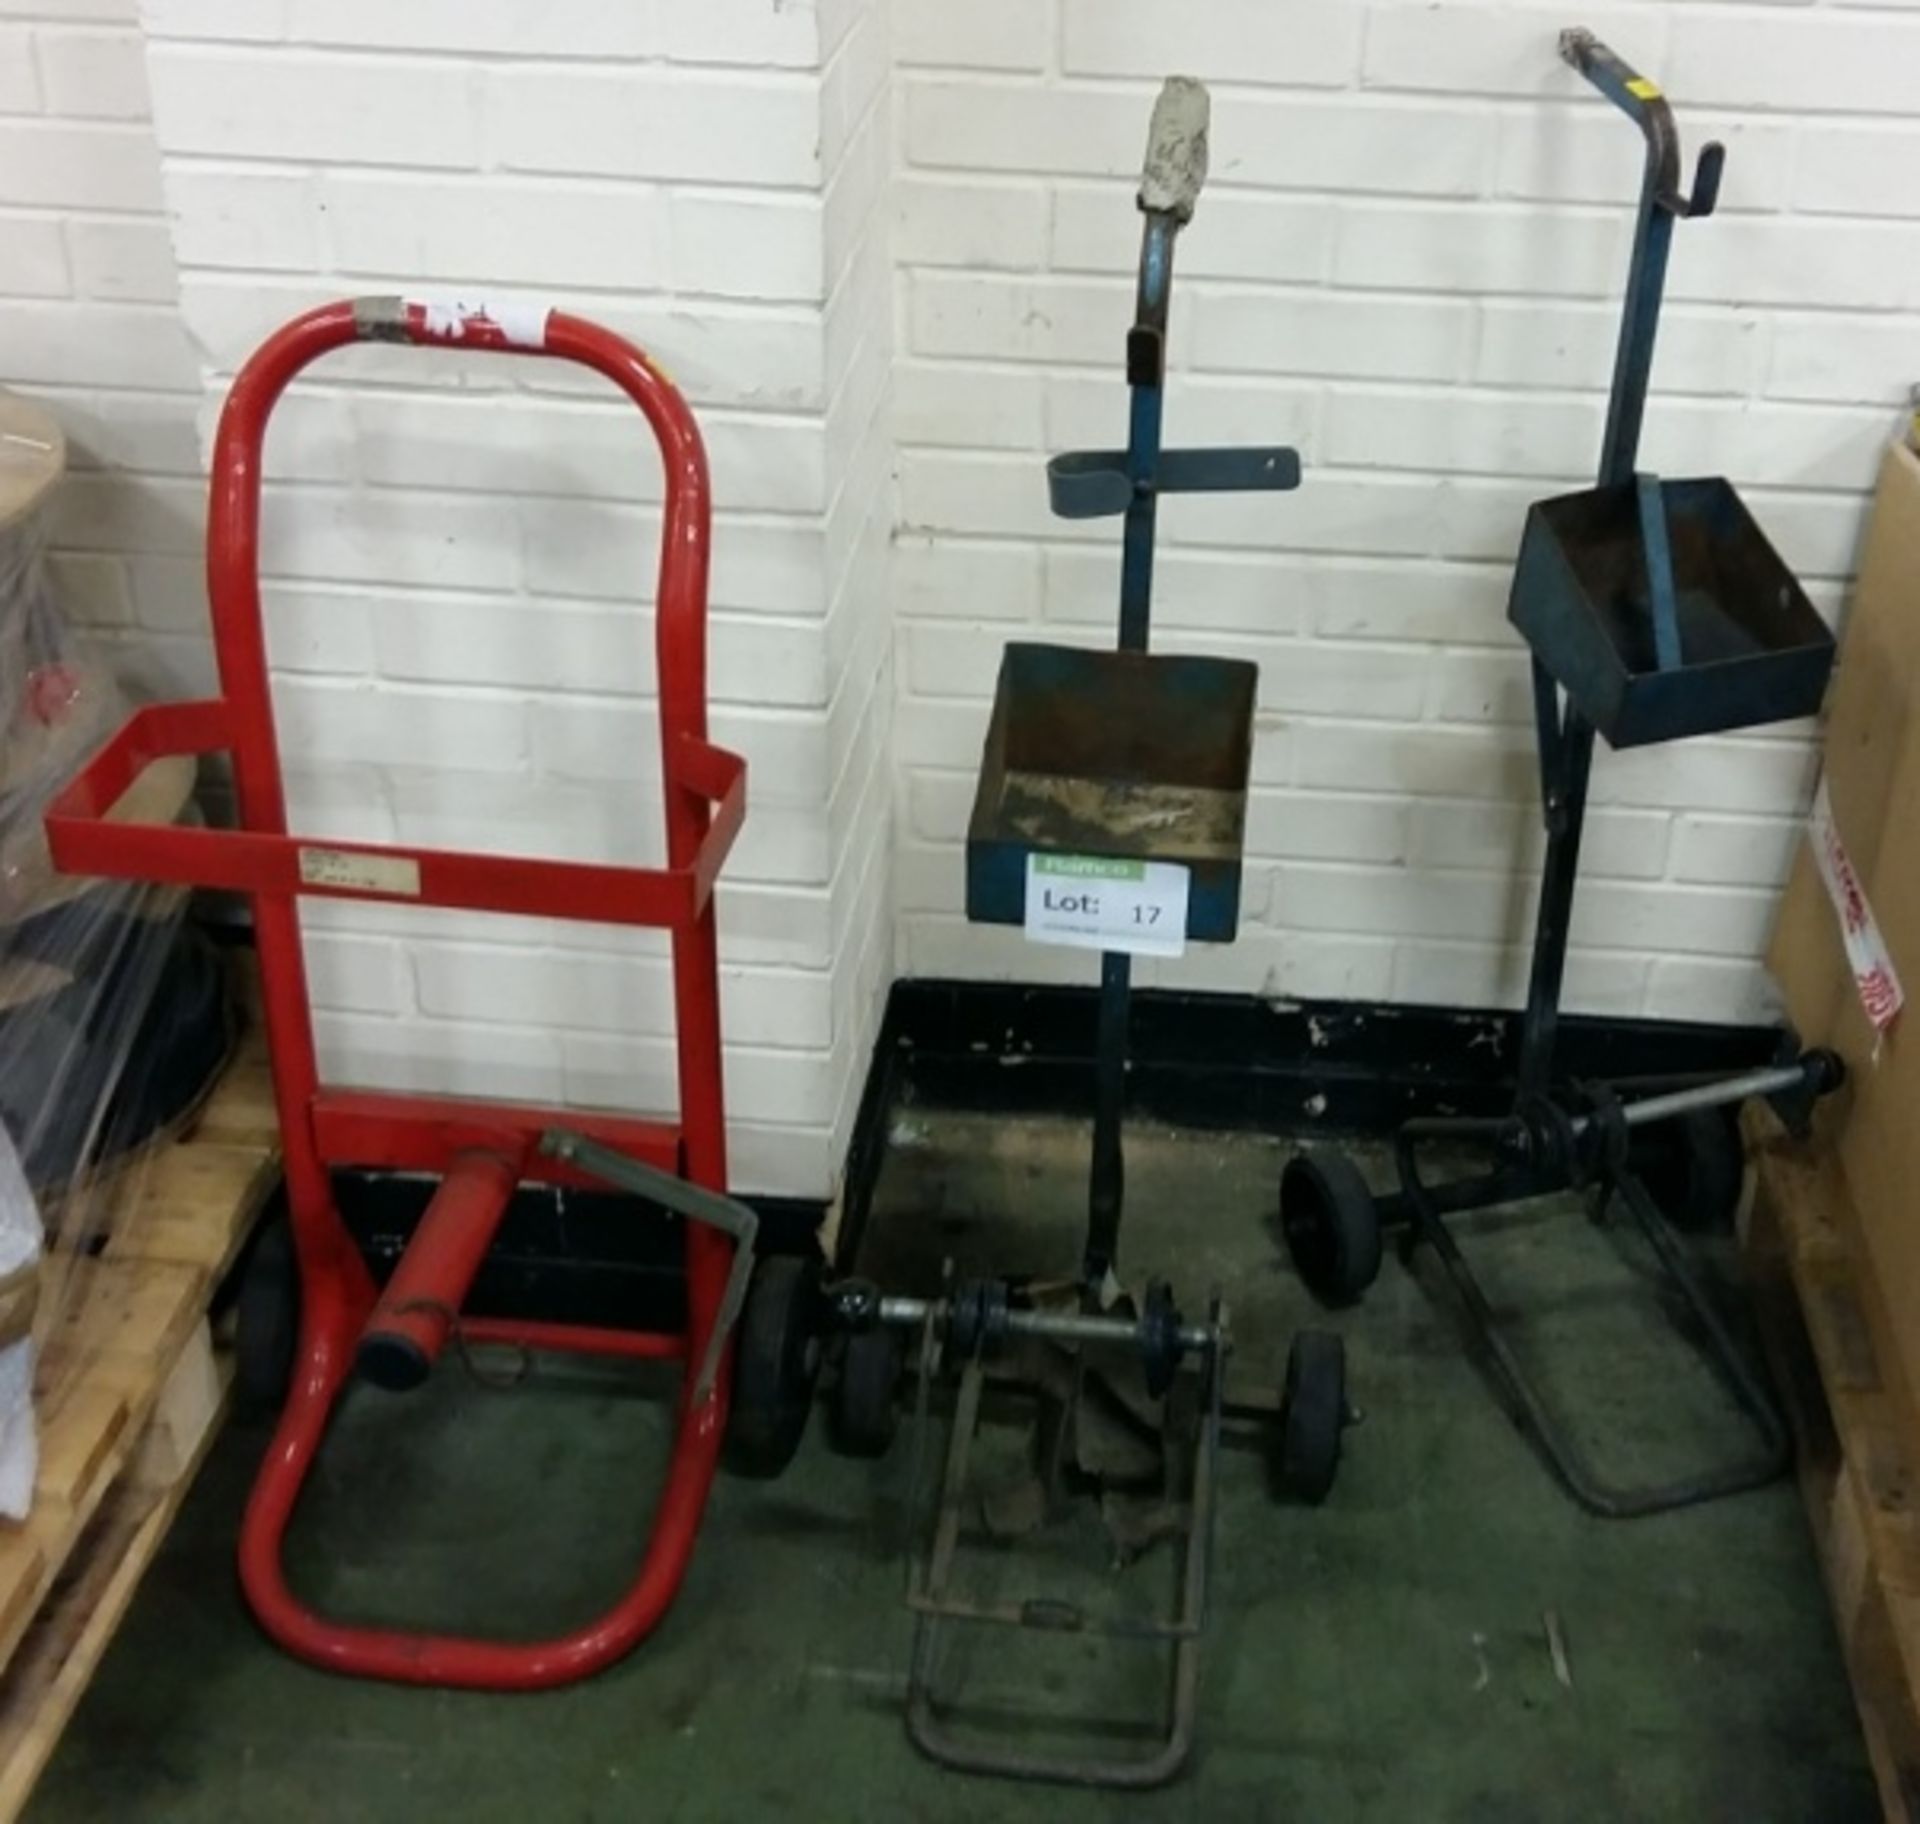 3x Pallet strapping trollies